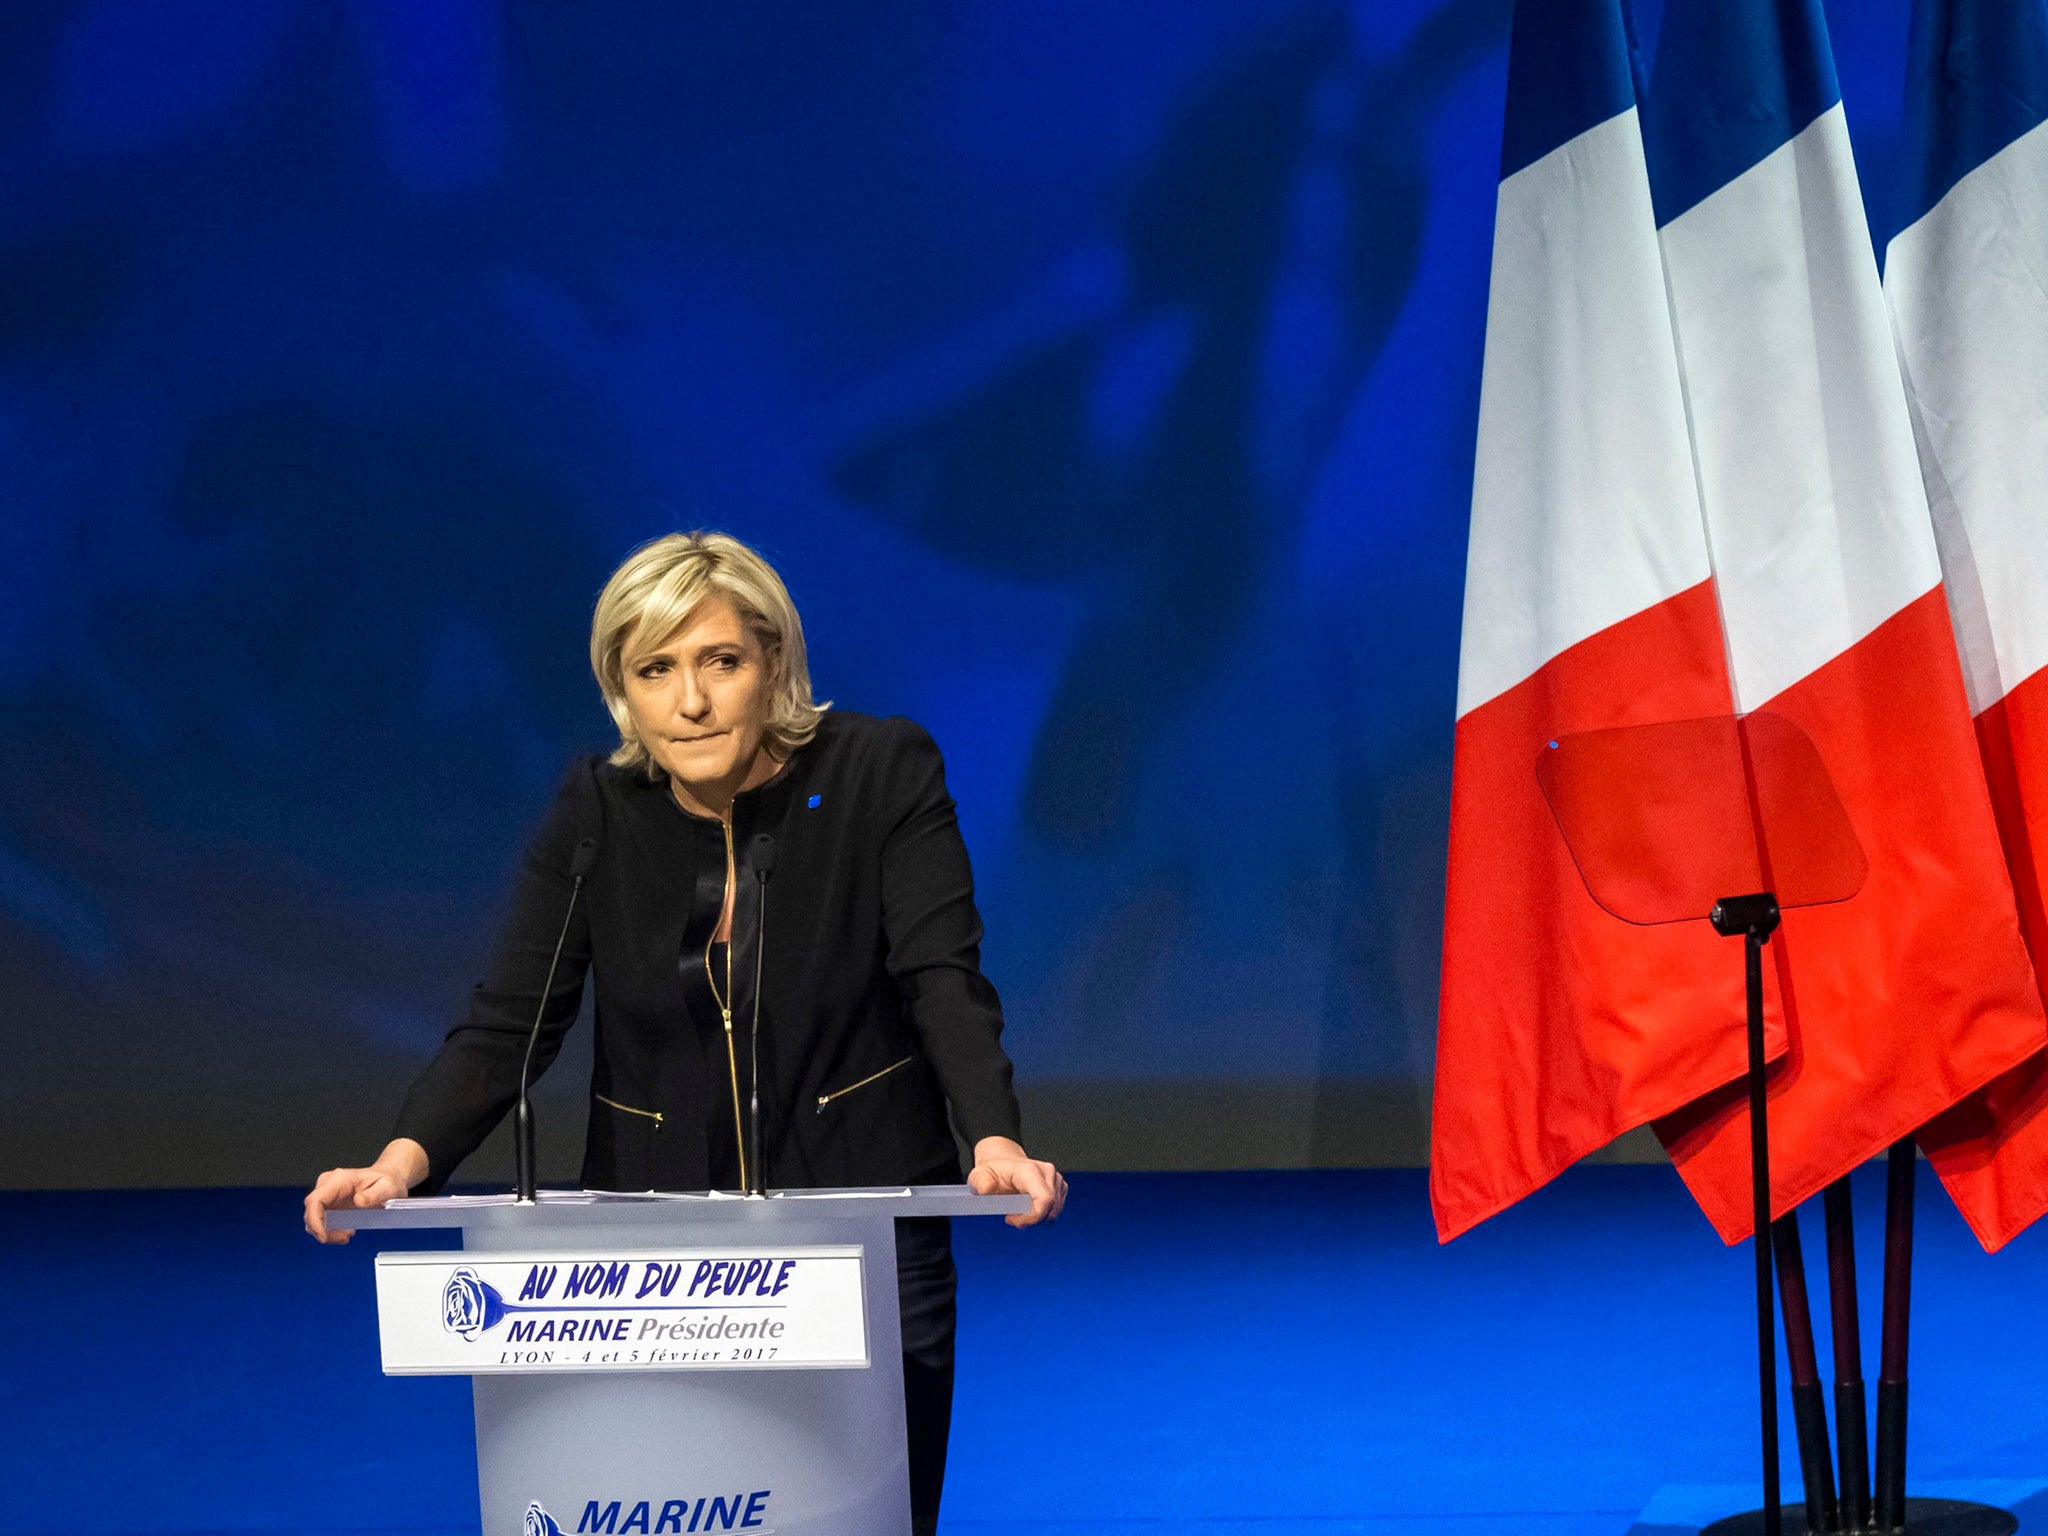 Marine Le Pen of France Meets With Vladimir Putin in Moscow - The